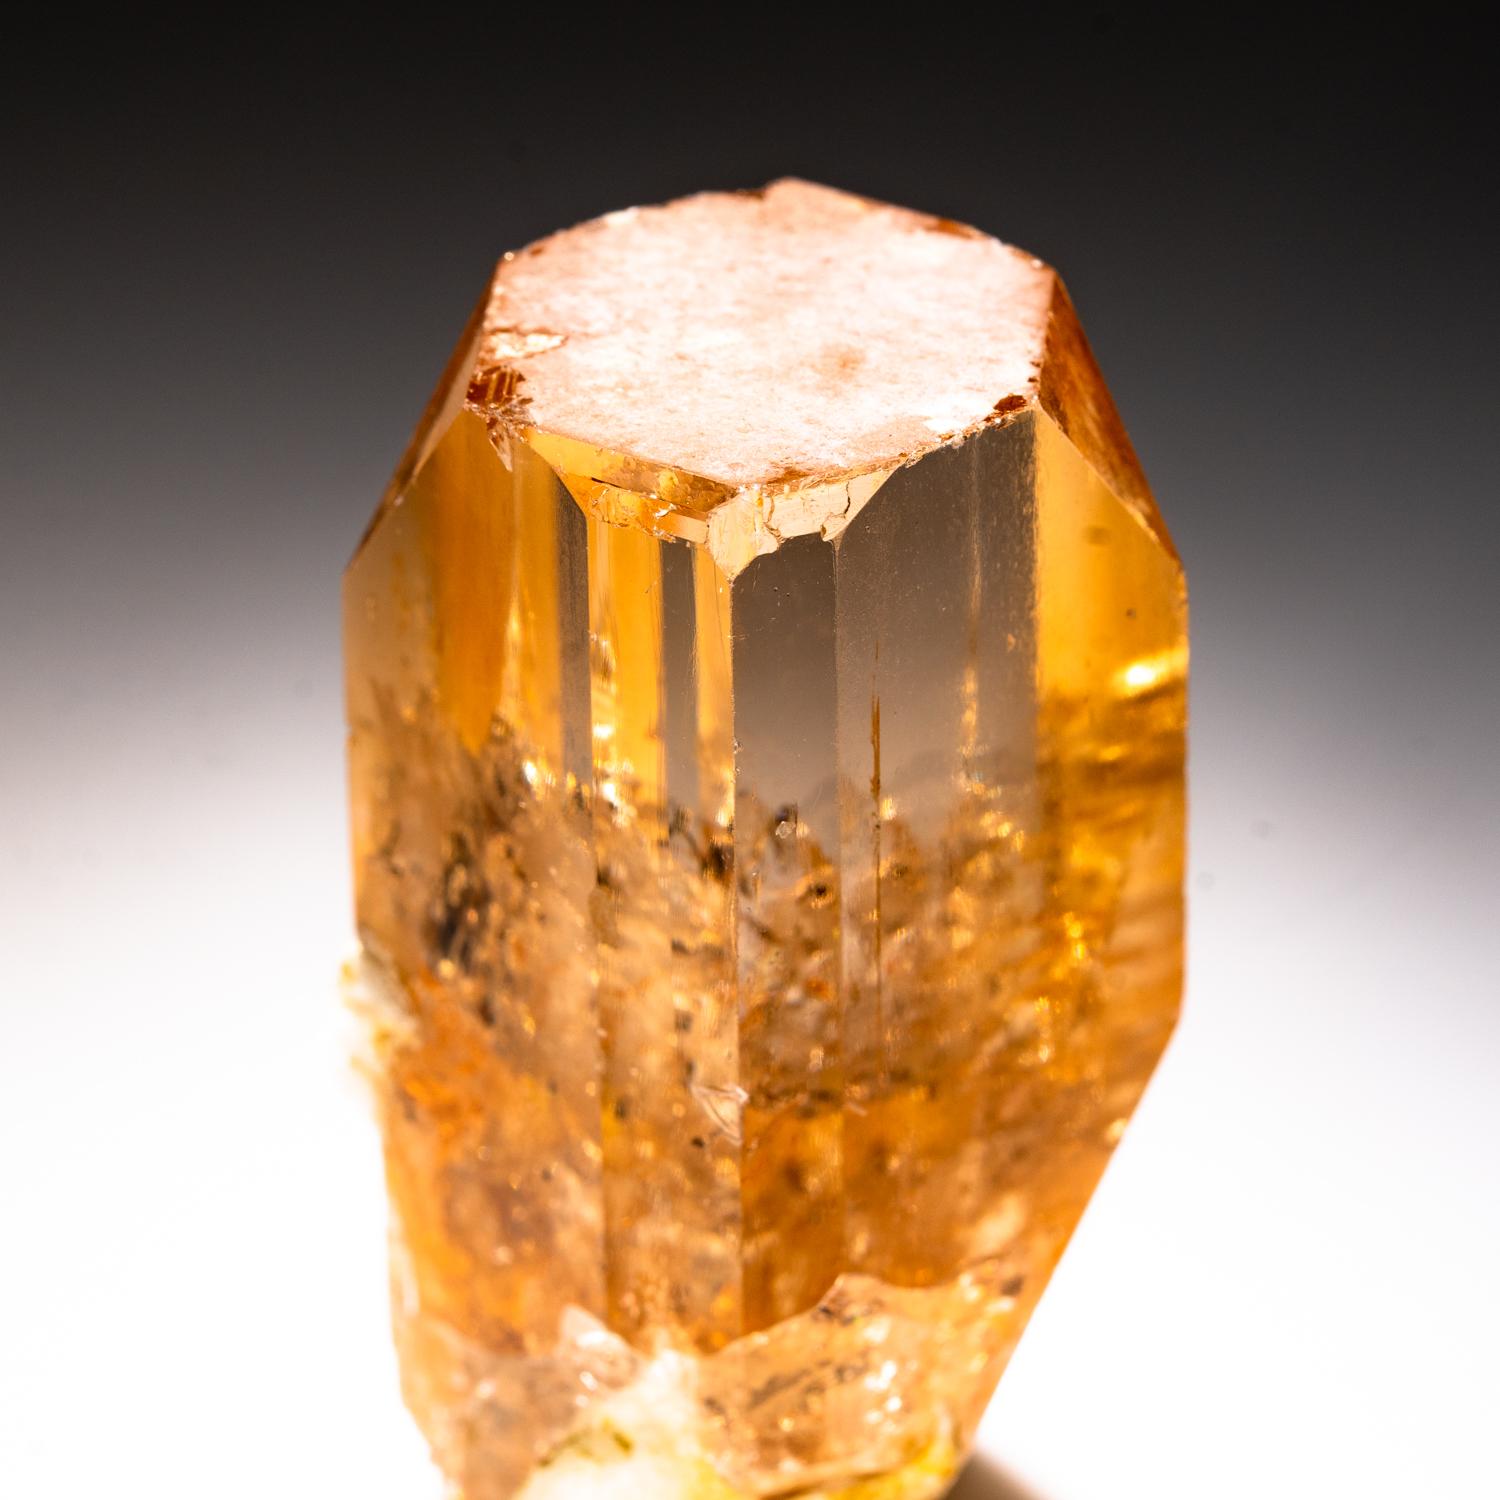 From Shigar Valley, Skardu, Baltistan, Gilgit-Baltistan, Pakistan Large single crystal of transparent sherry colored Topaz with sharp complex basal pinacoid terminations. Crystal is well formed with glassy luster faces. This unique, rare stone is